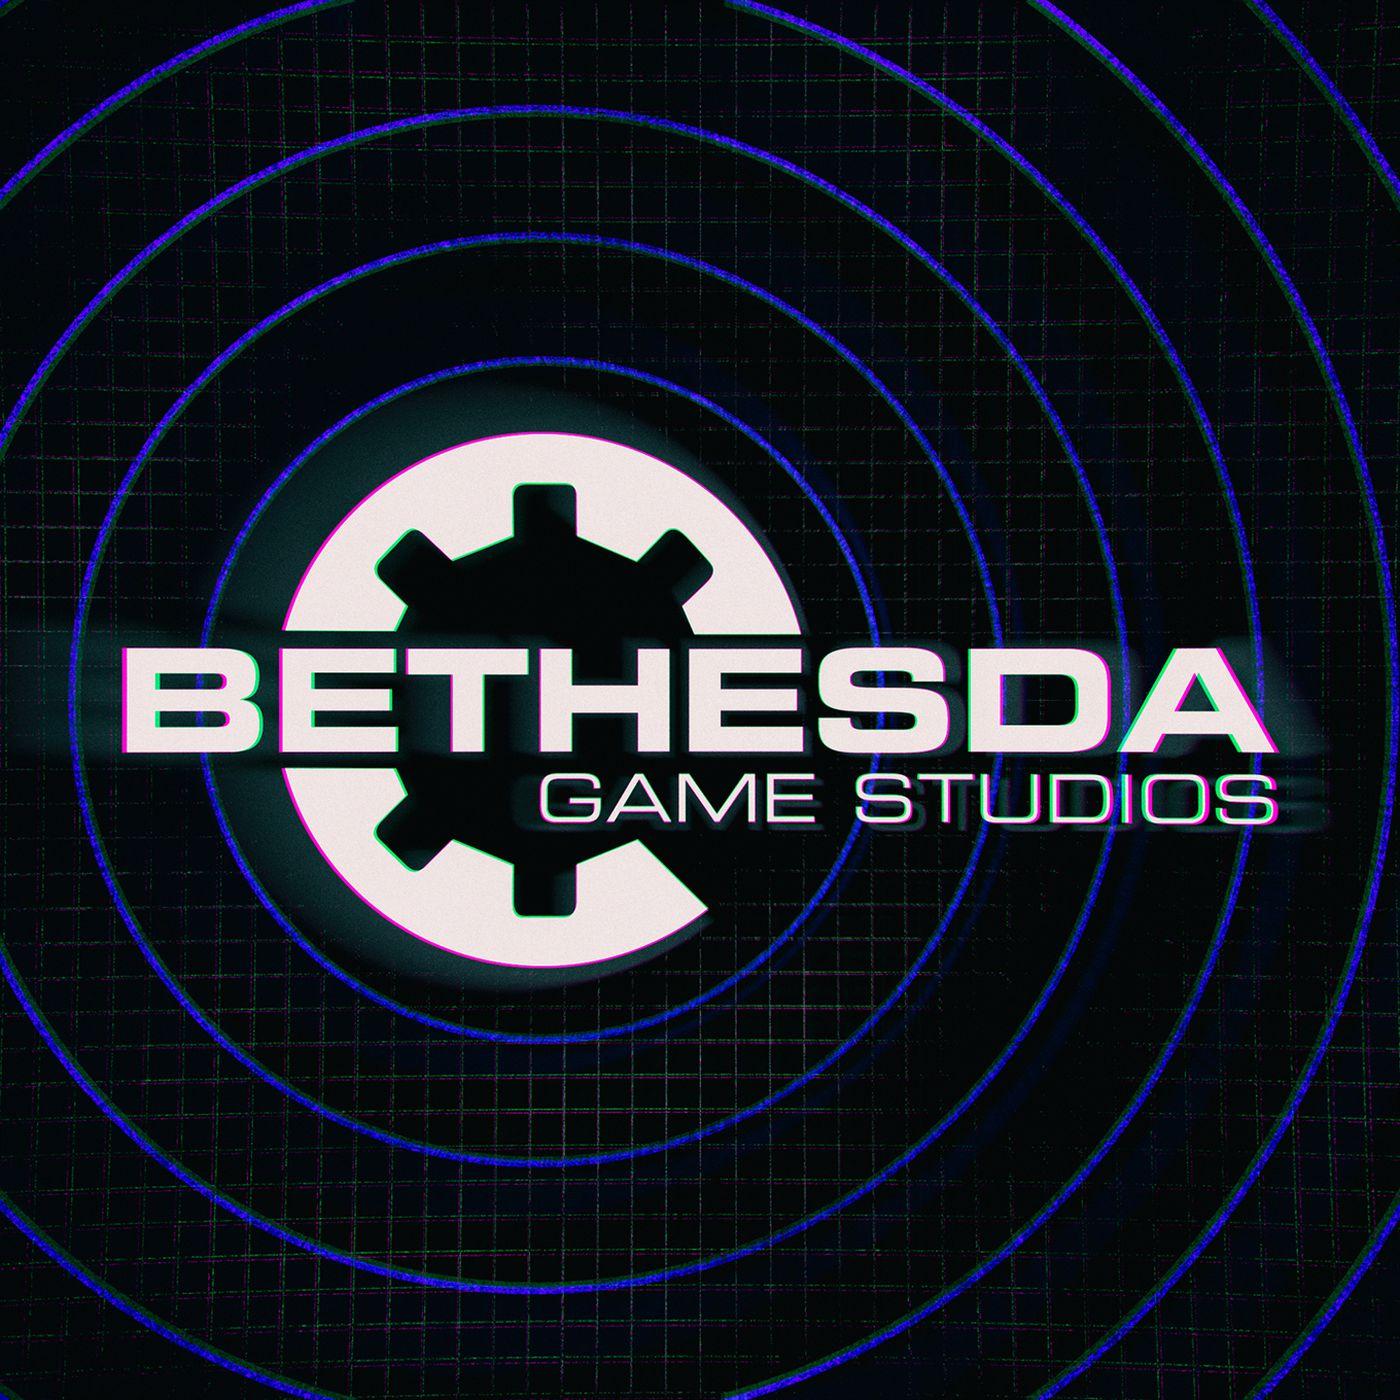 Bethesda's E3 2019 press conference: how to watch the live stream